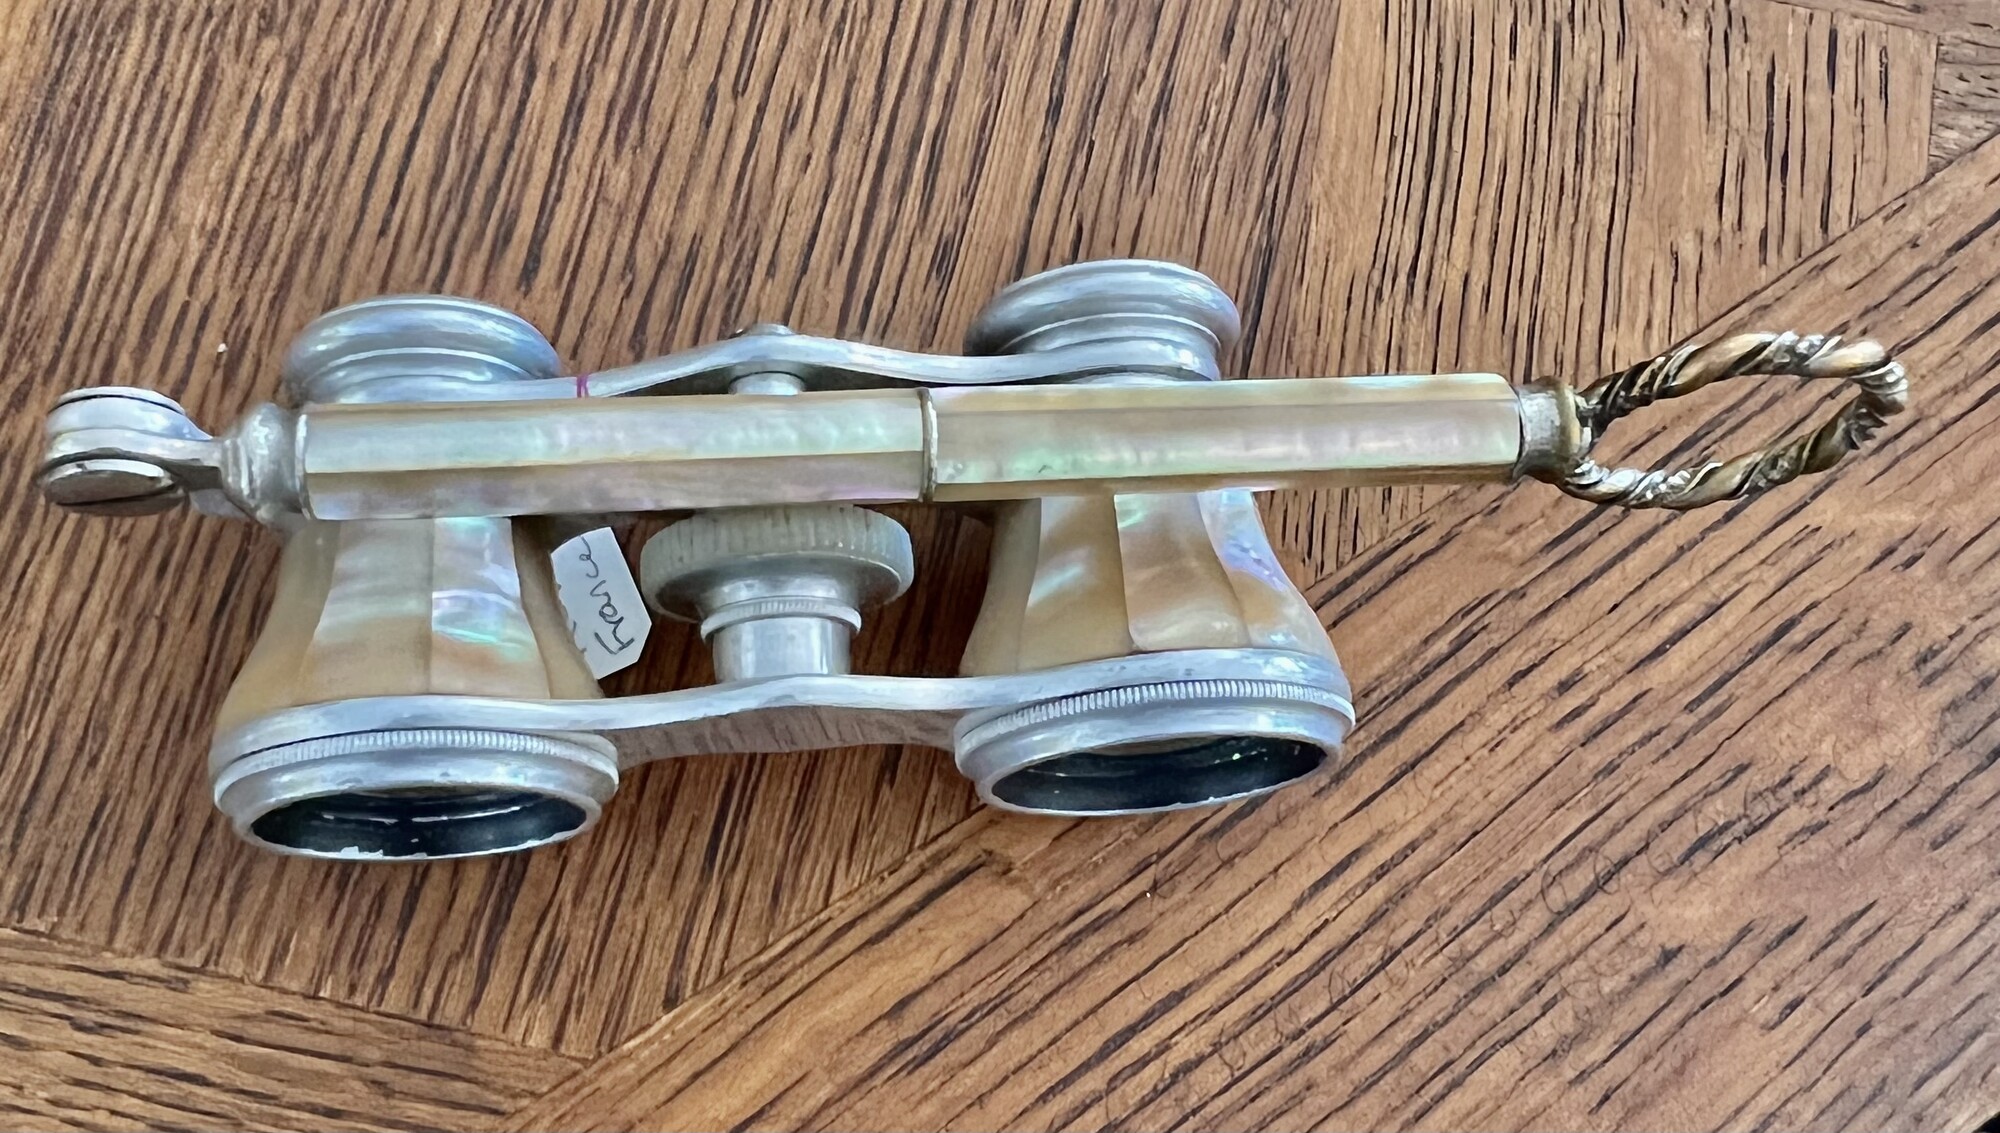 Antique Mother of Pearl Opera Glasses with folding handle. Still work perfectly!
Will ship USPS Priority mail.